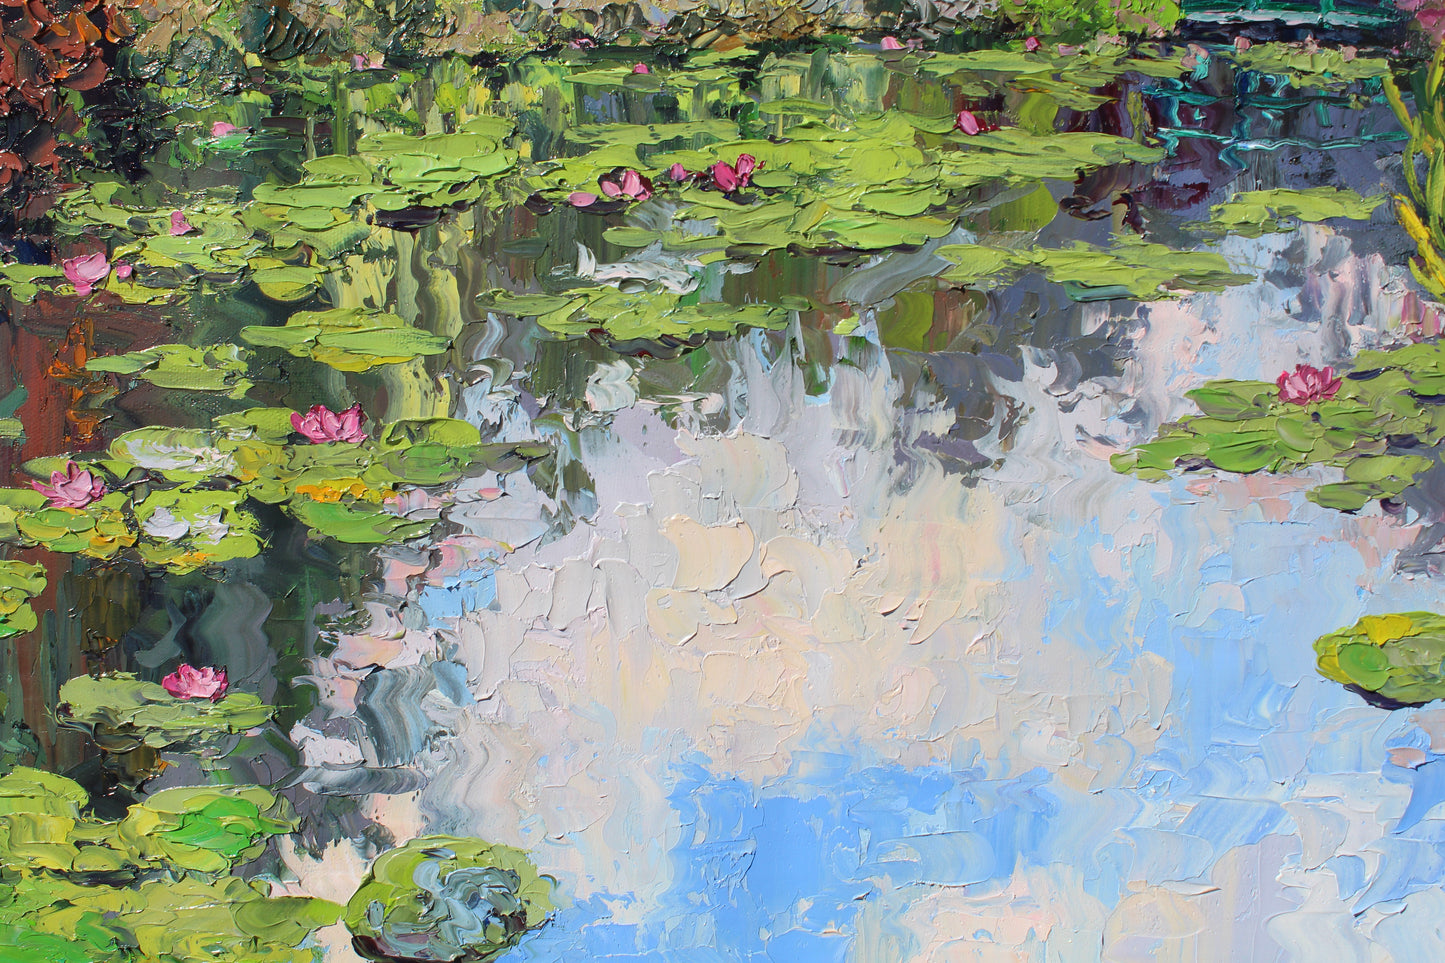 Dreaming Of Giverny, An Original 18" x 20" Garden Landscape Of Monet's Waterlily Pond, Oil On Canvas